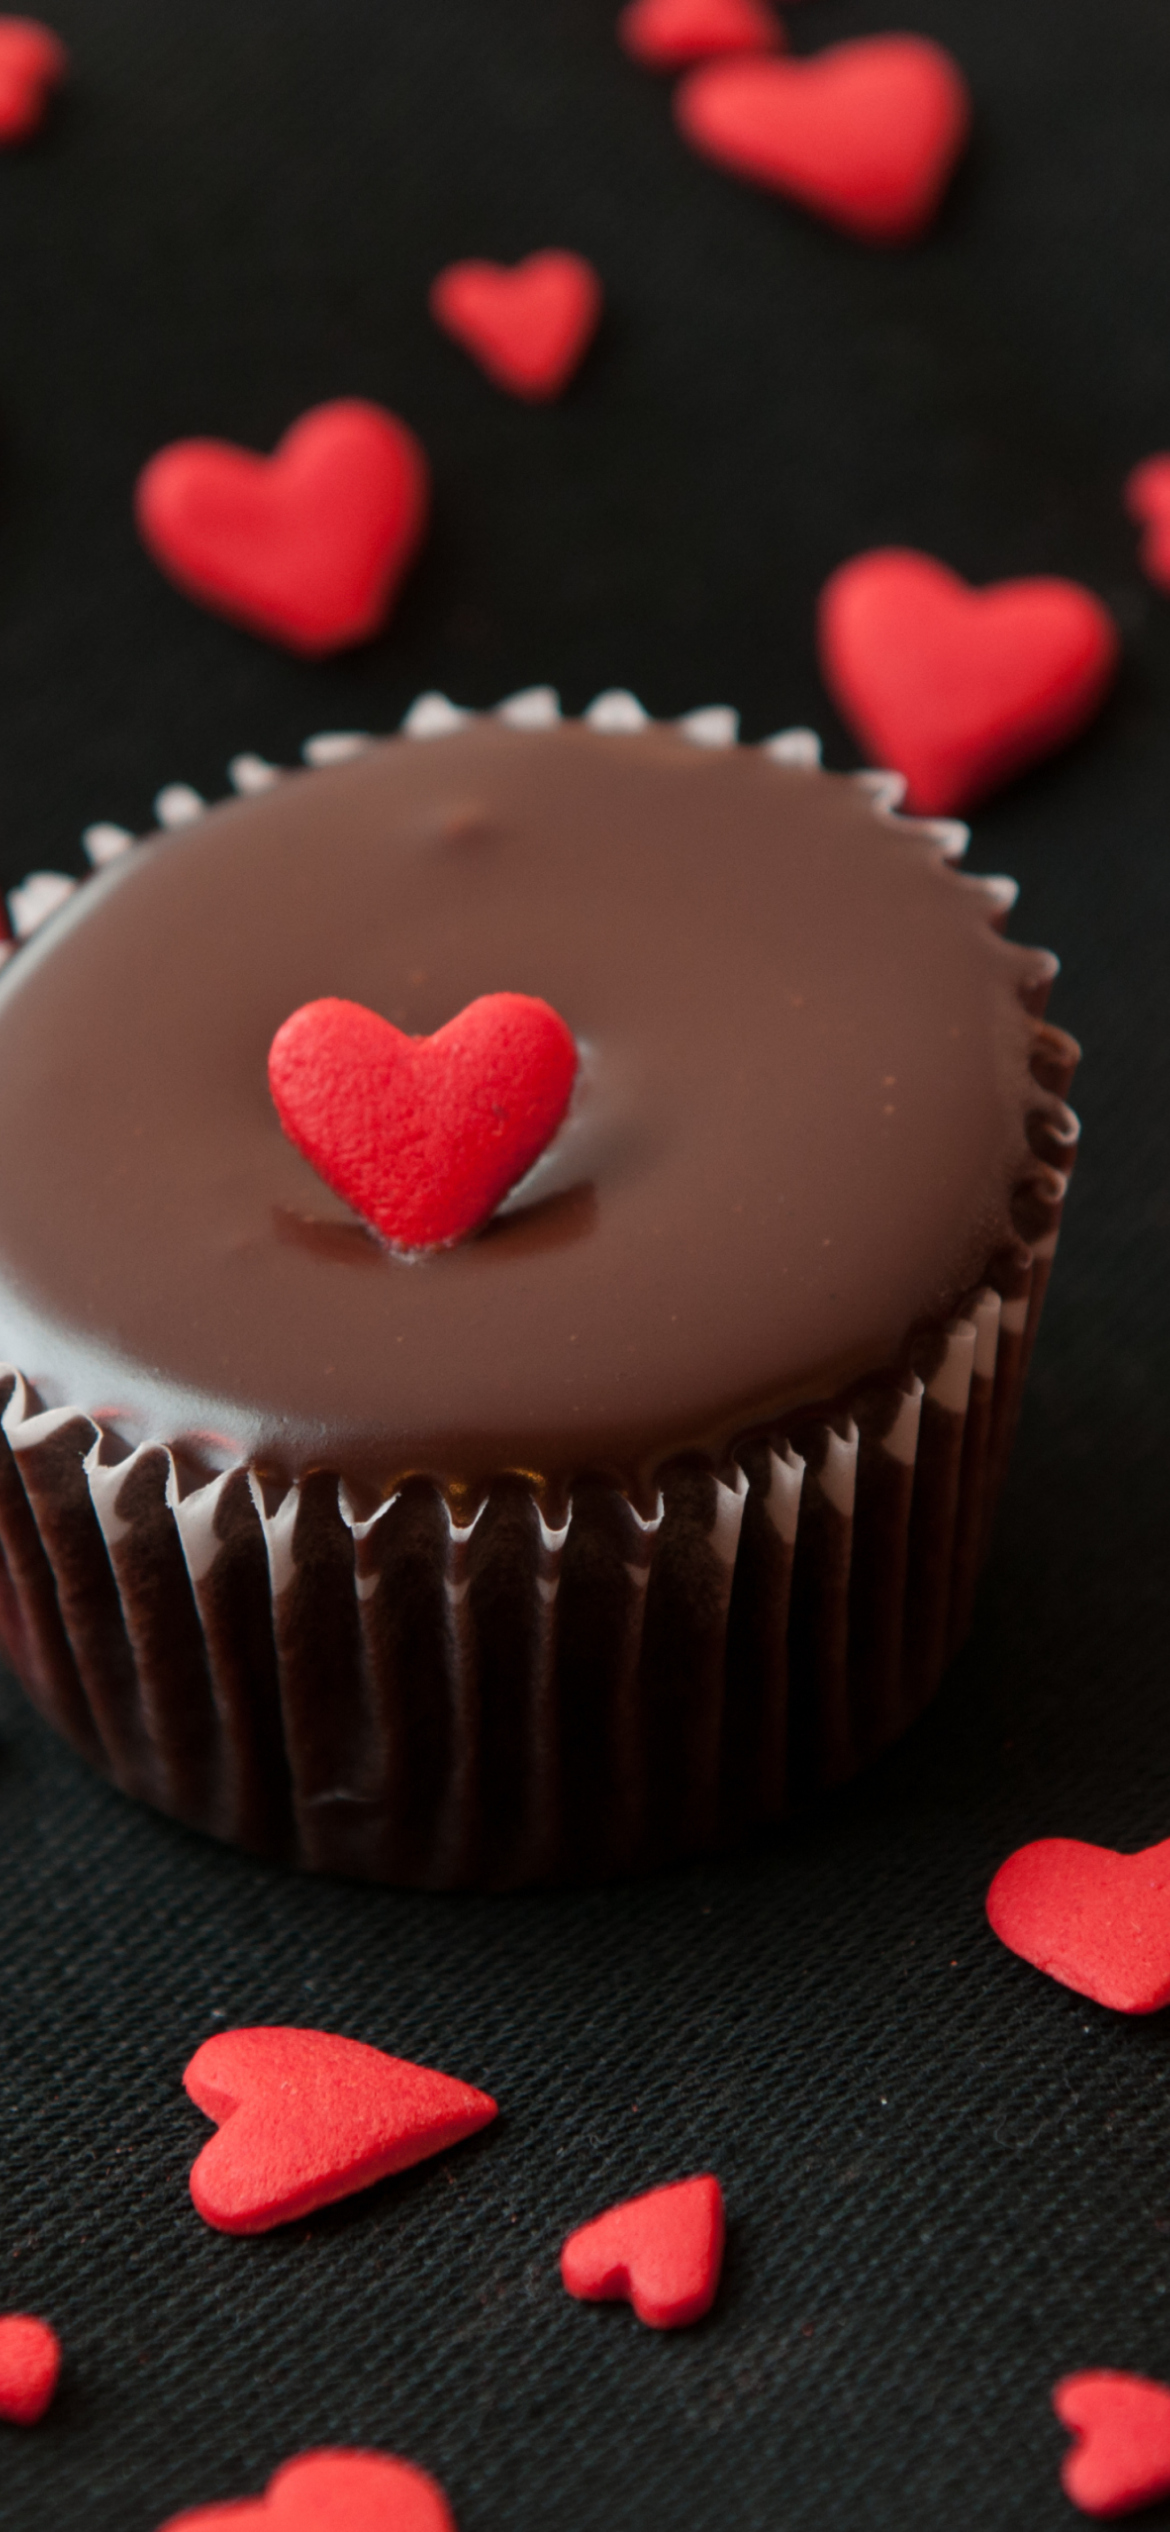 Chocolate Cupcake With Red Heart wallpaper 1170x2532